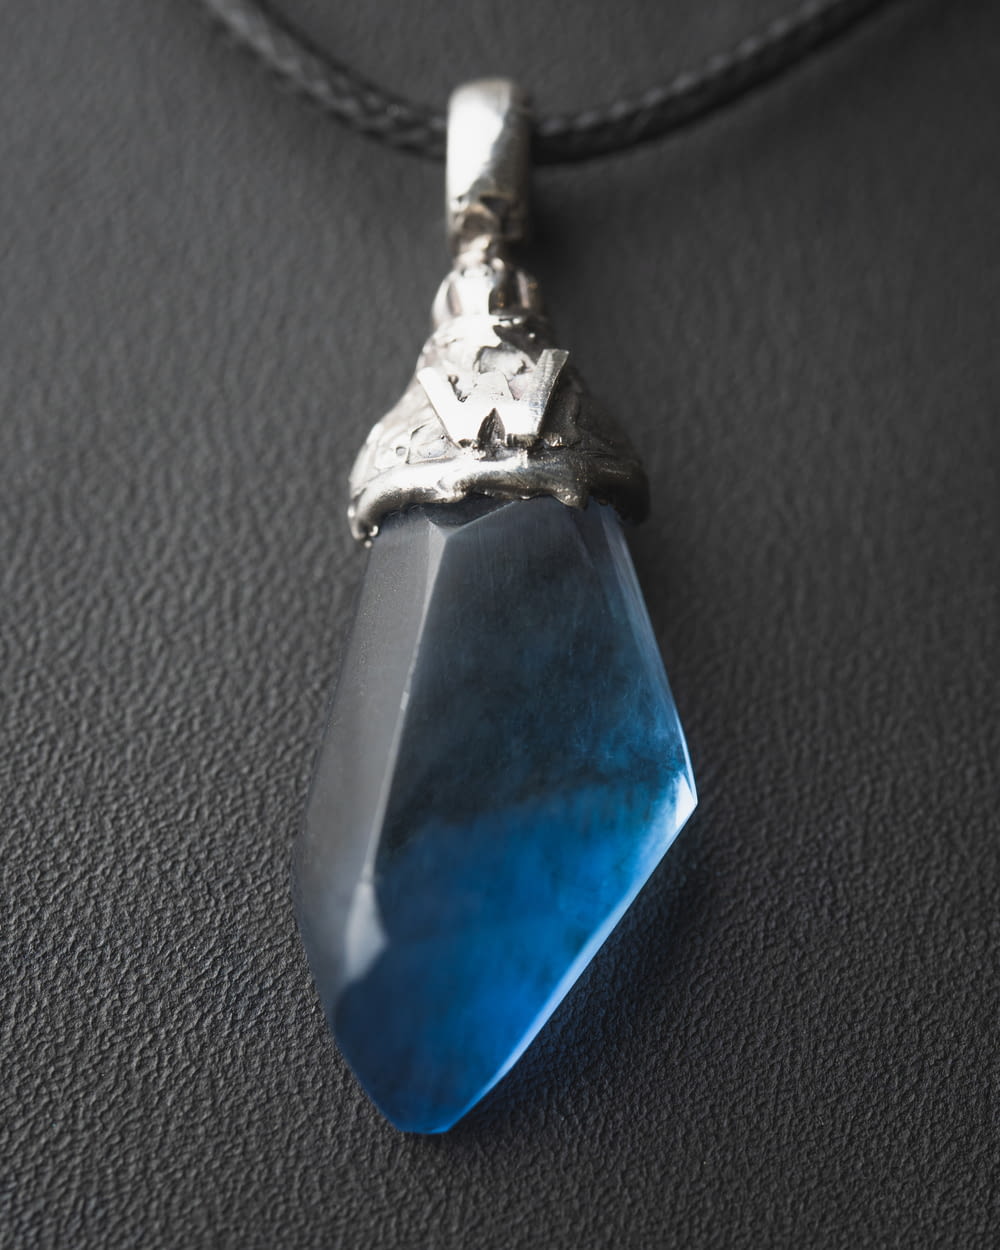 a necklace with a blue stone hanging from it